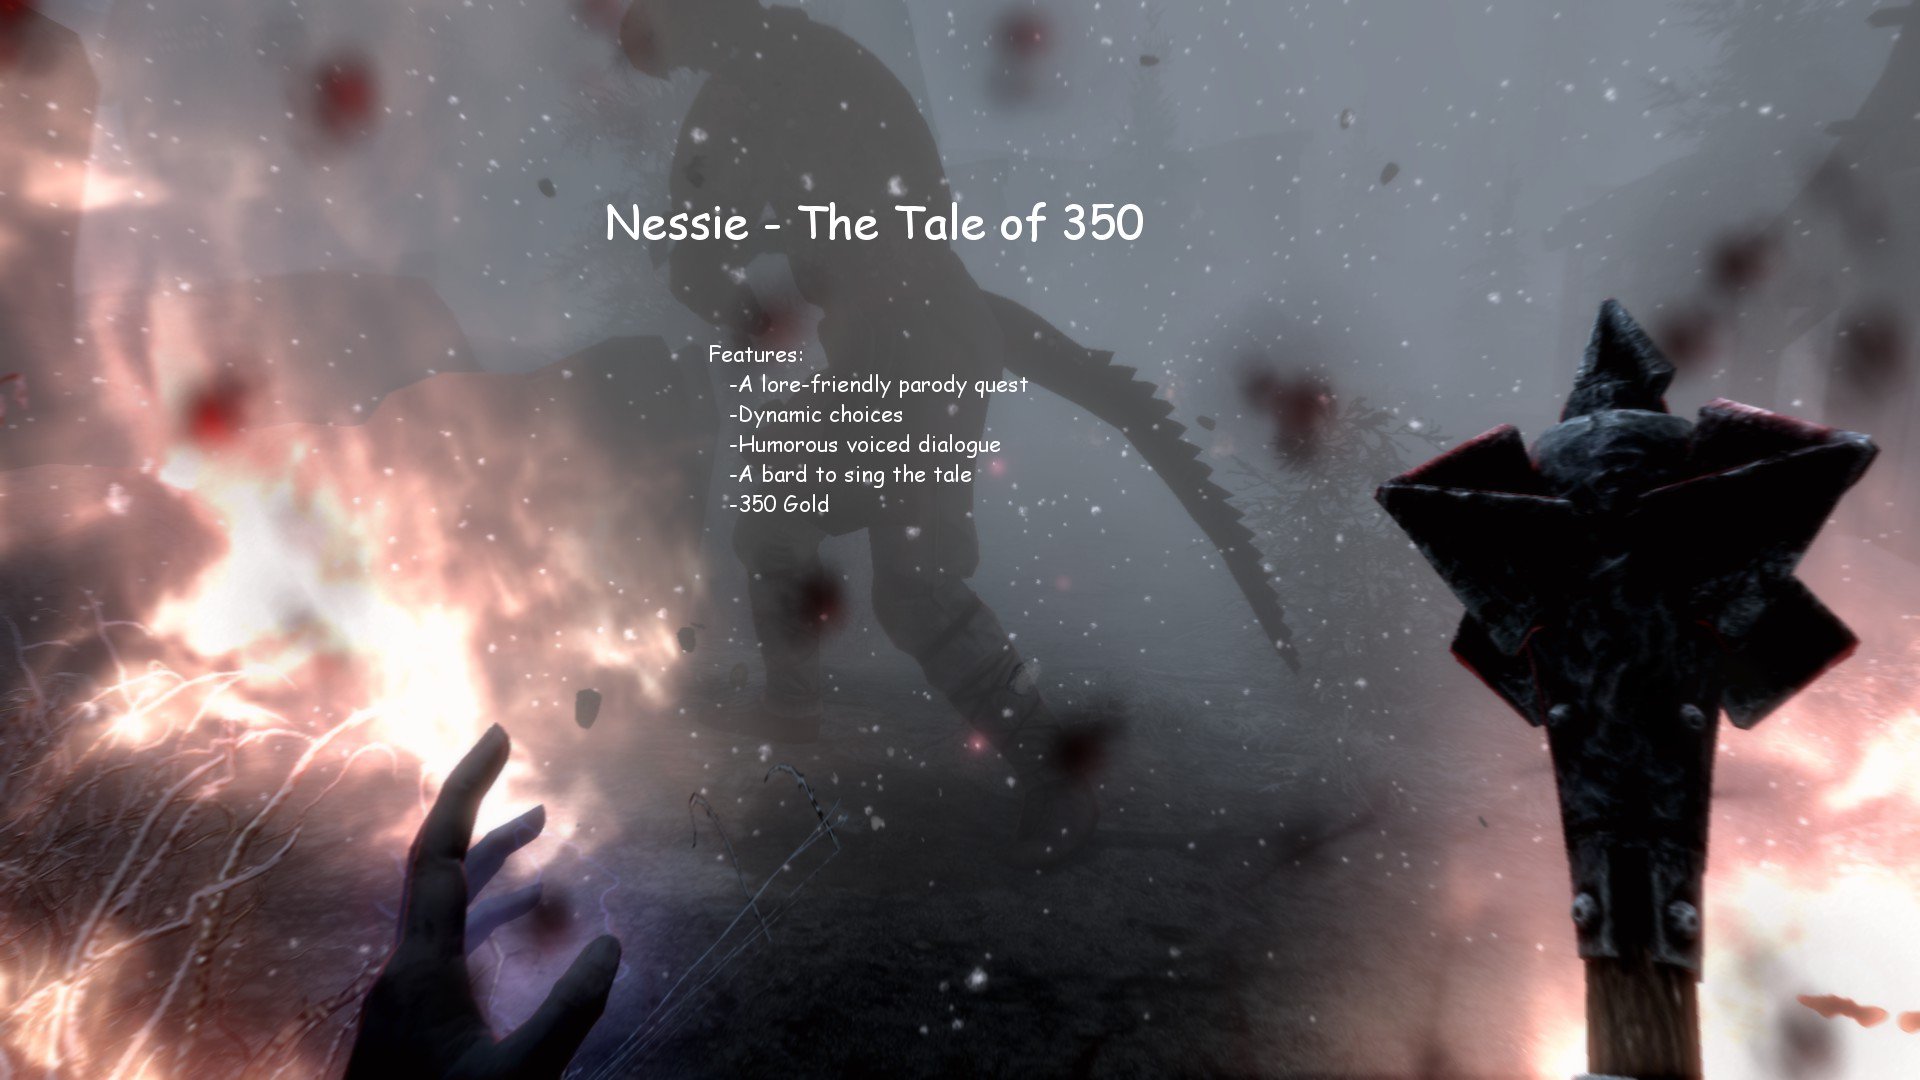 Nessie - The Tale of 350